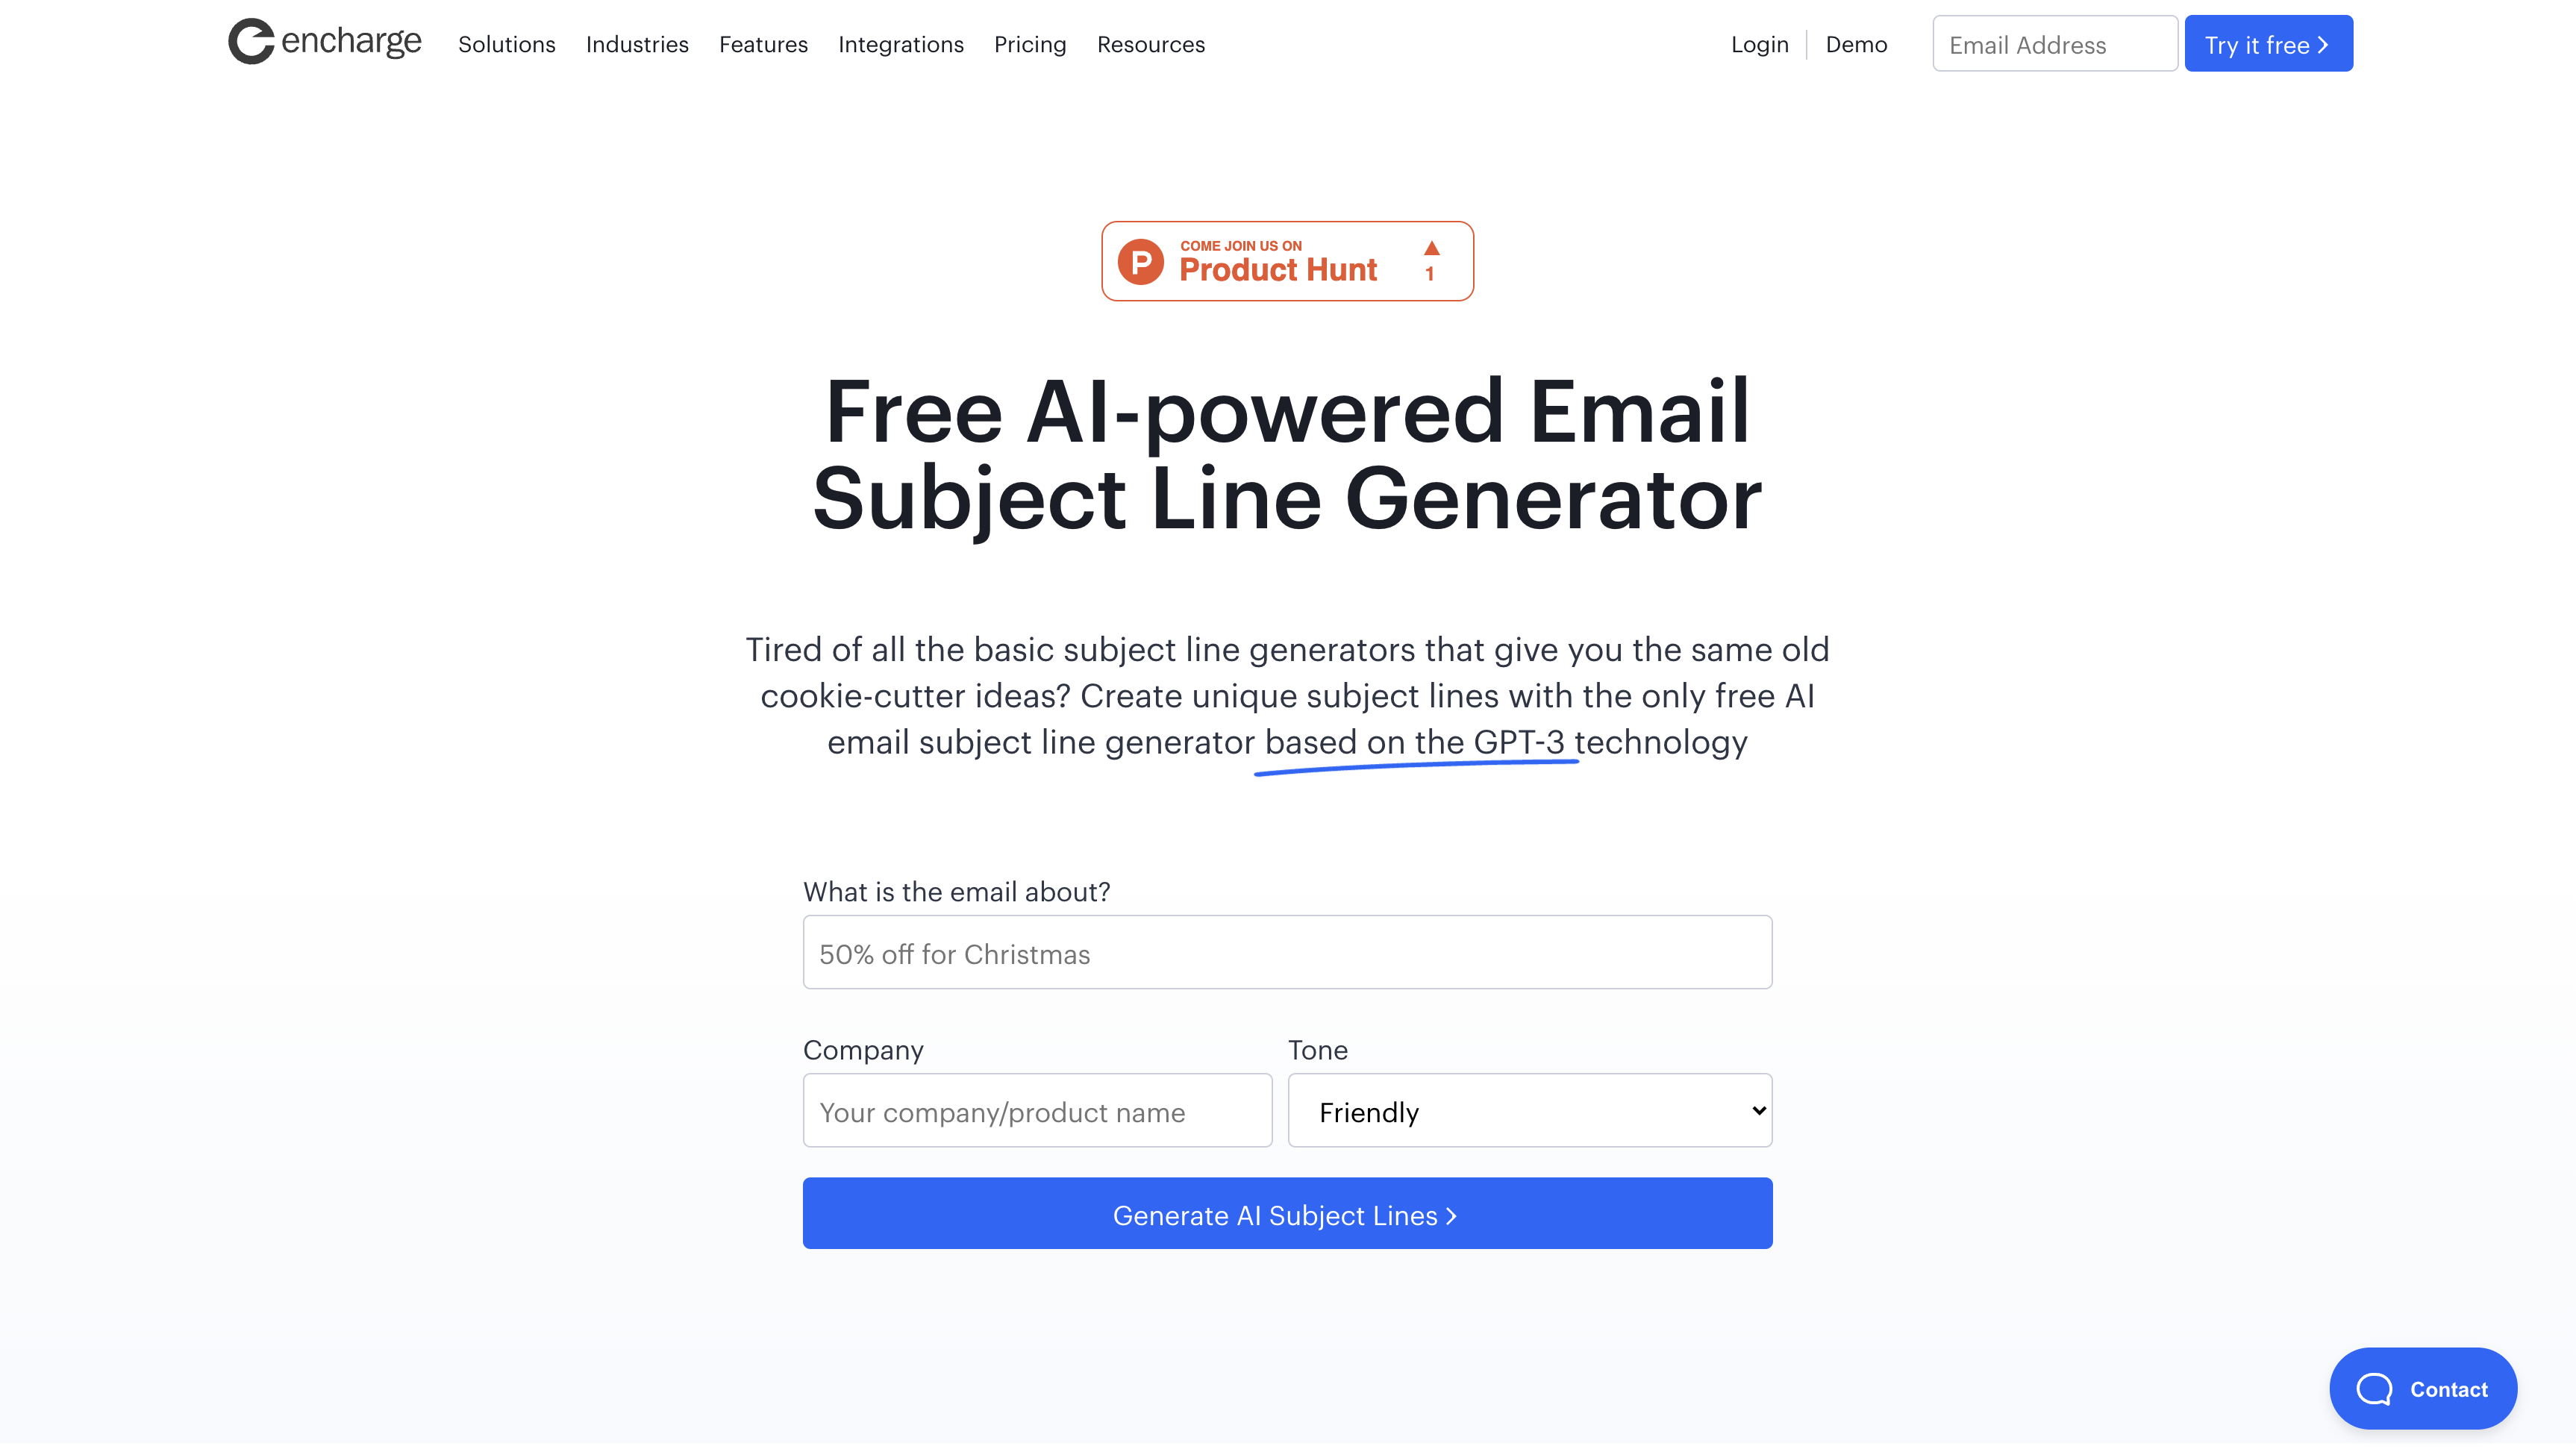 Free AI Email Subject Line Generator by Encharge - screen 2